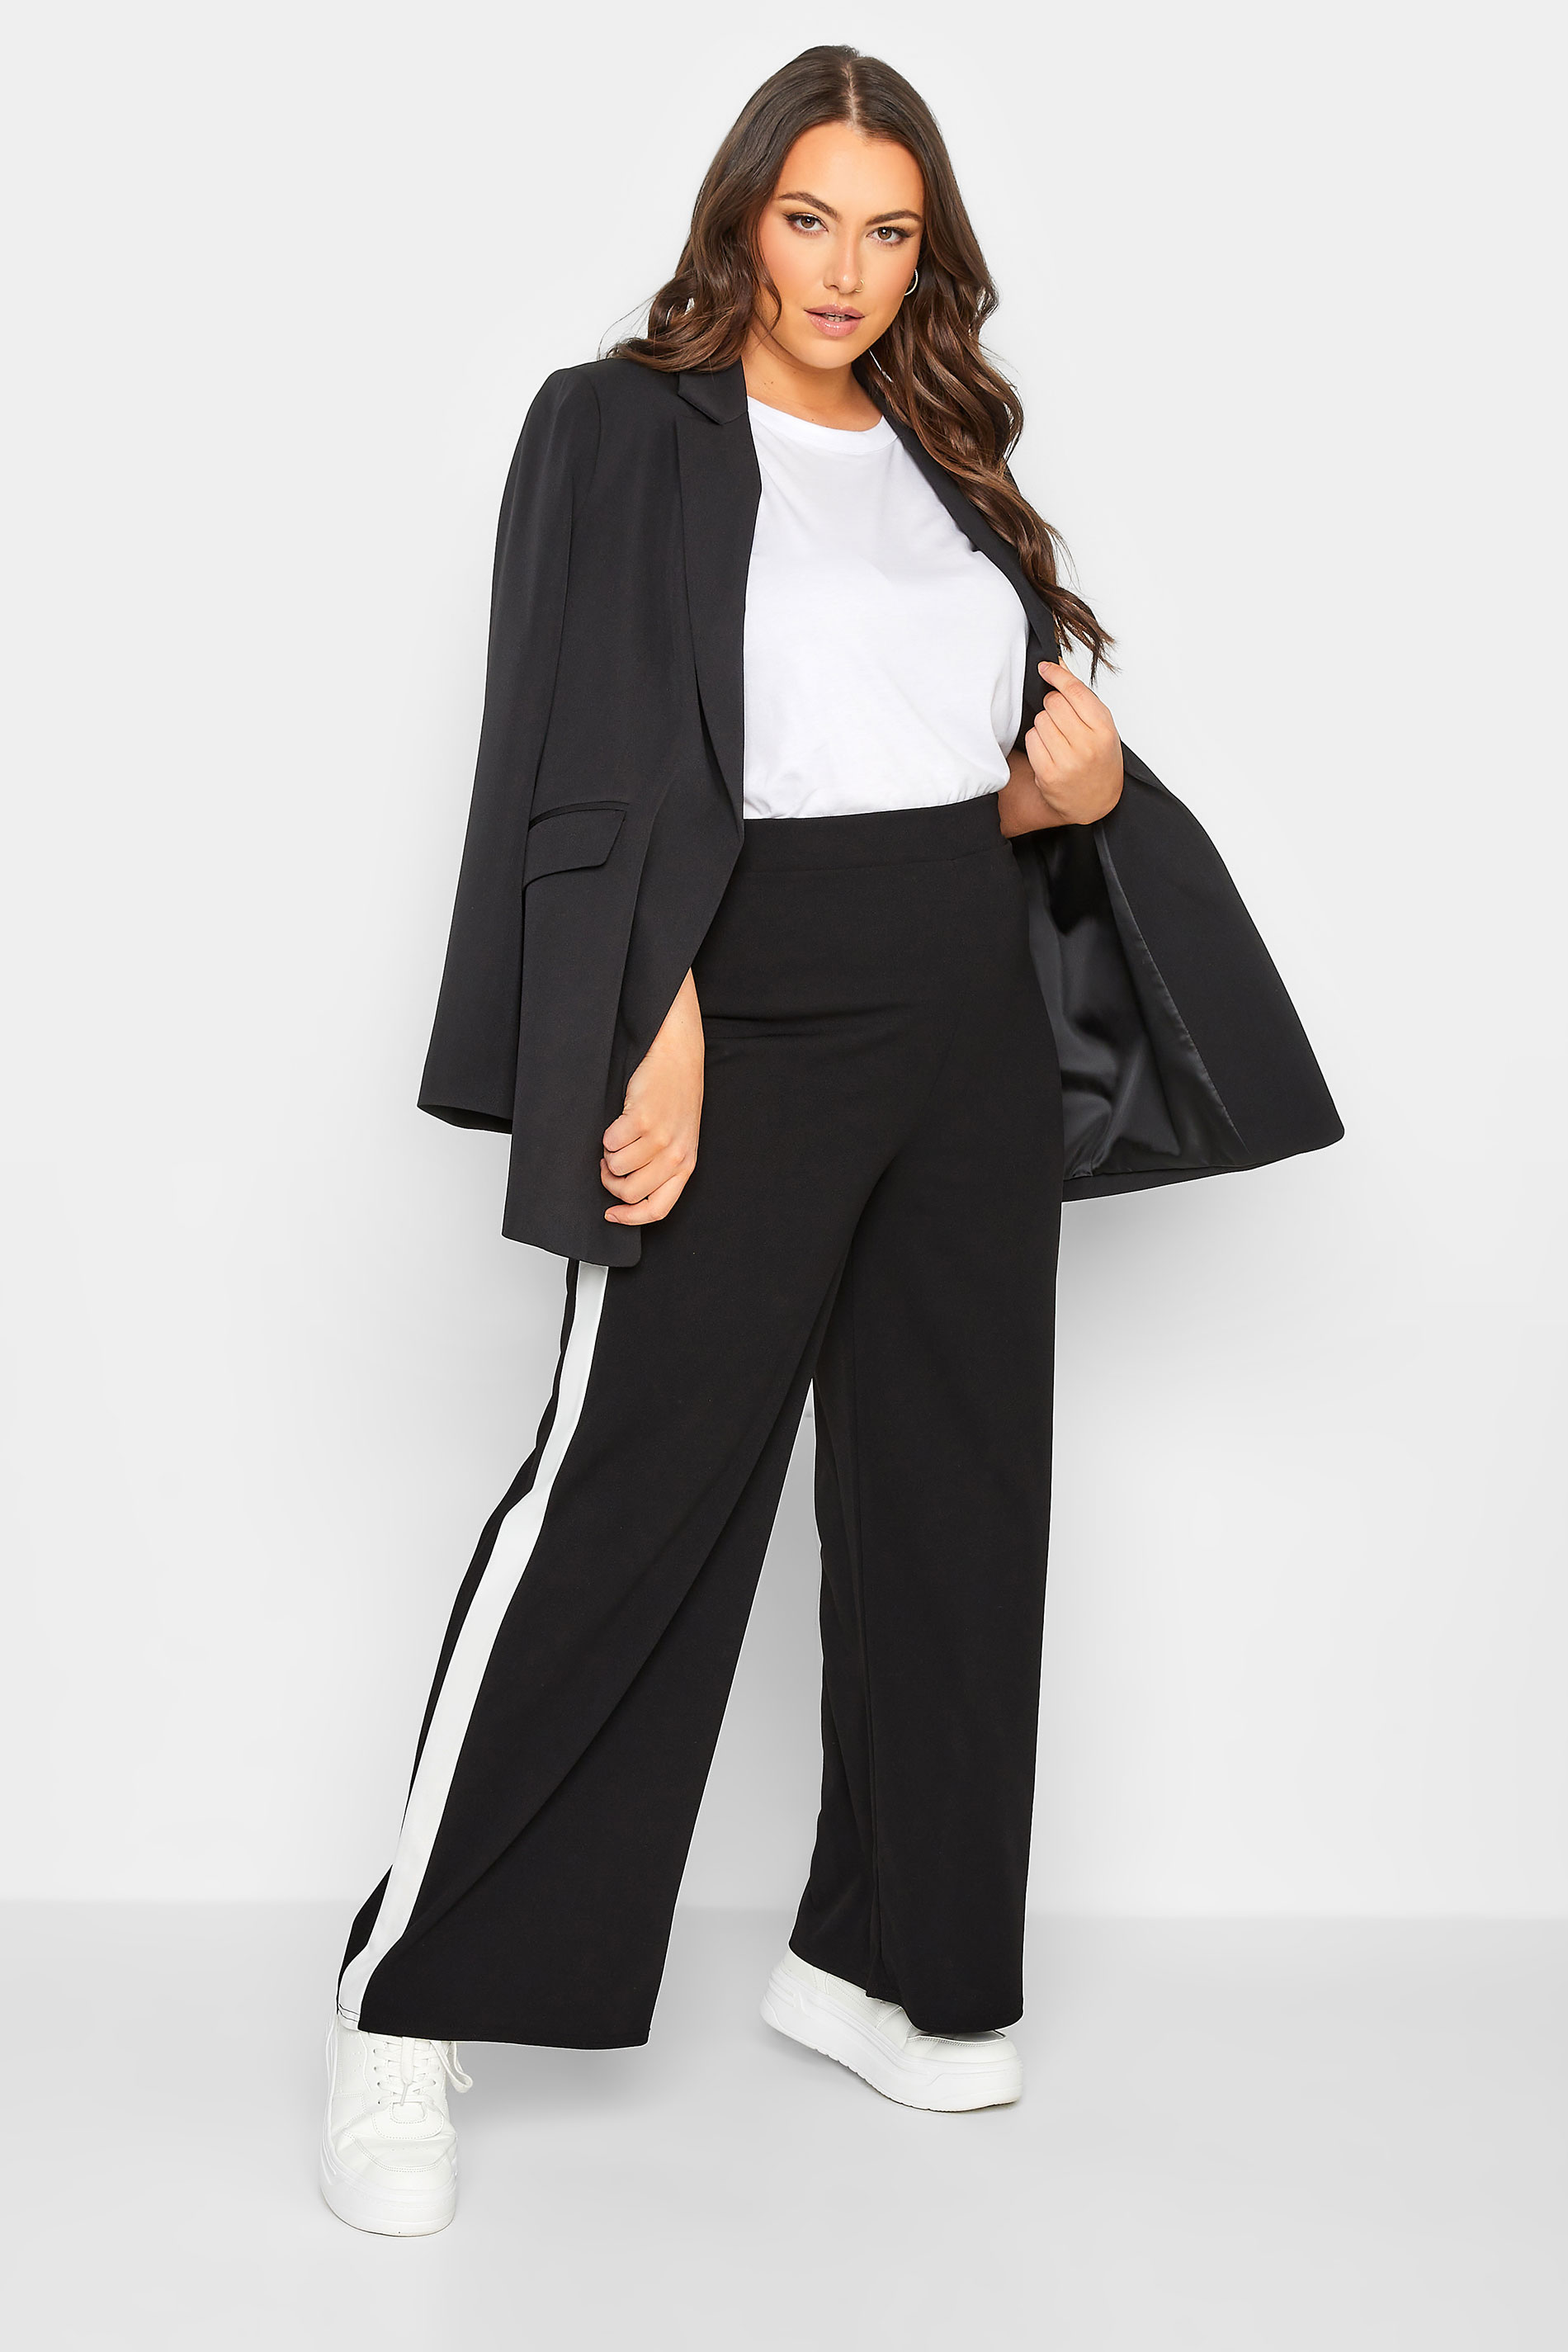 YOURS Plus Size Black & White Contrast Stripe Super Wide Leg Trousers | Yours Clothing 3